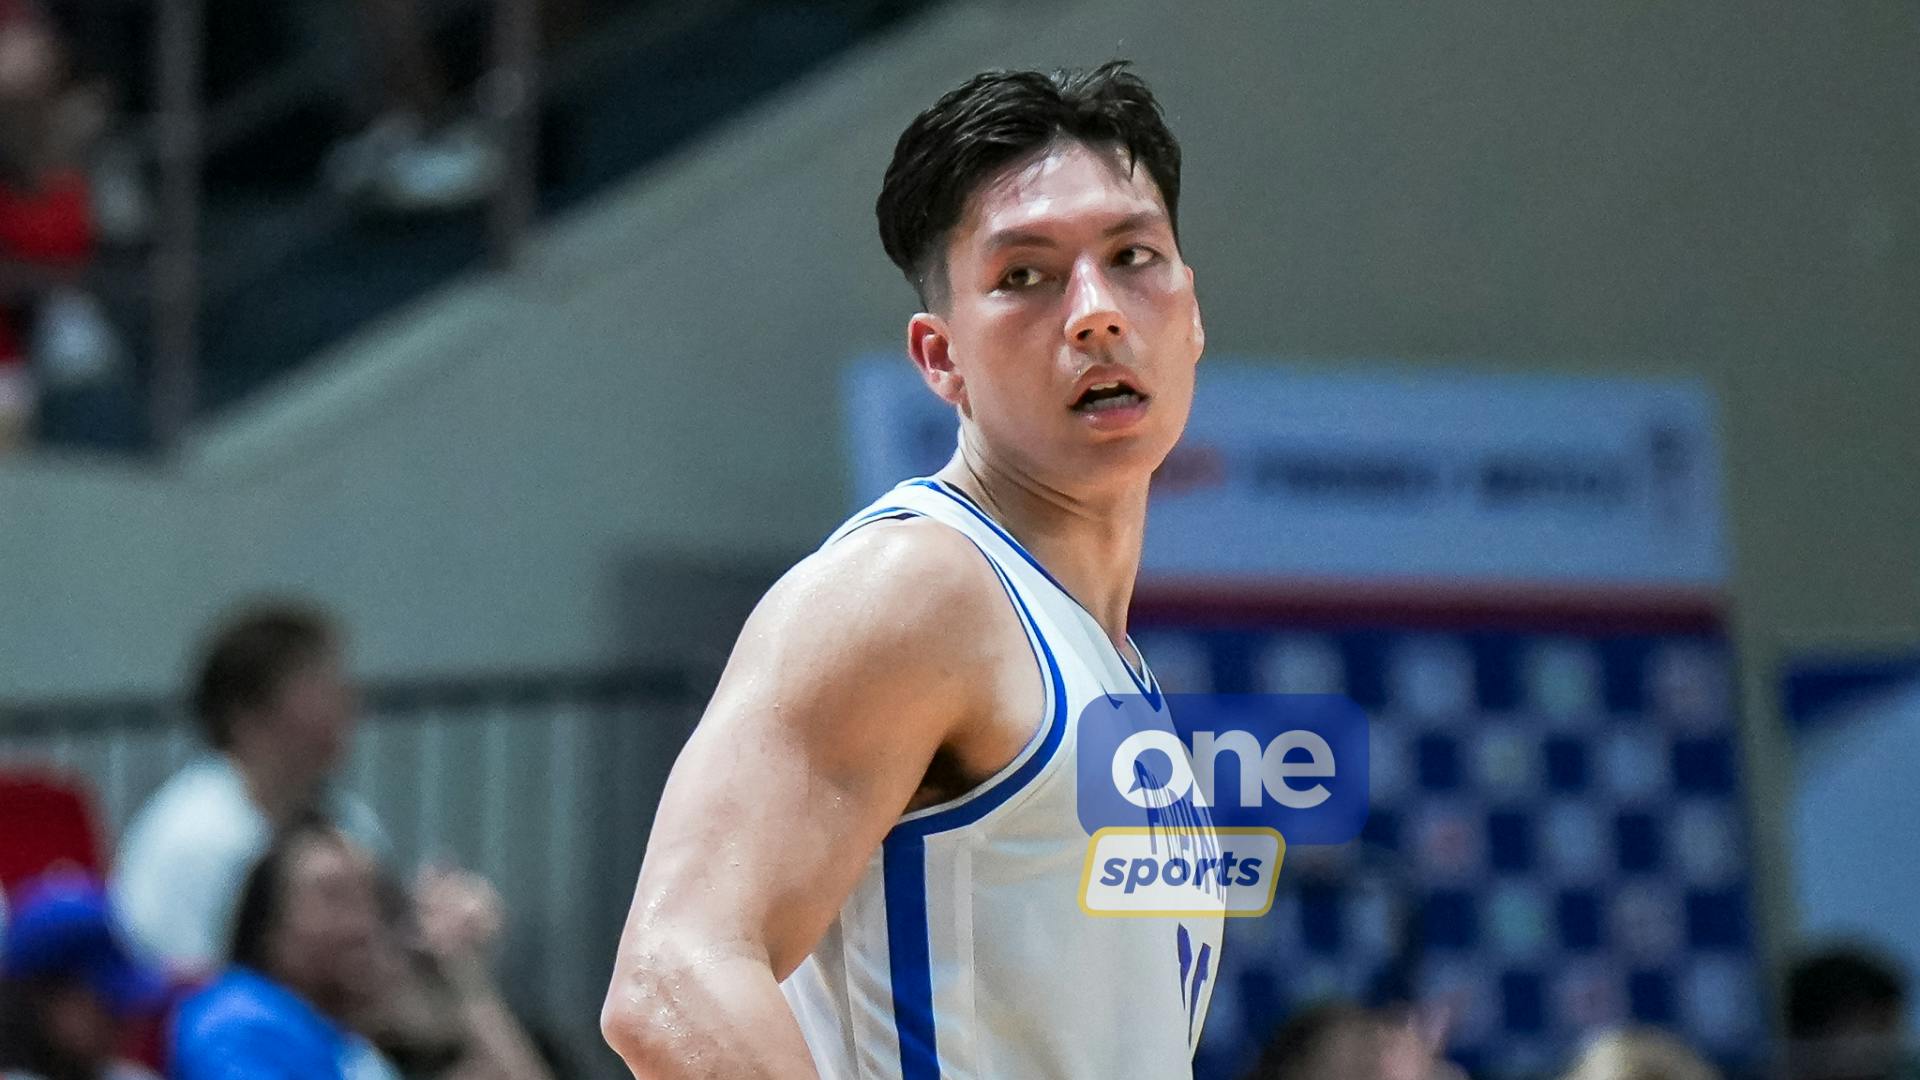 Gilas Pilipinas drop close call to Poland in final tuneup before FIBA OQT in Latvia